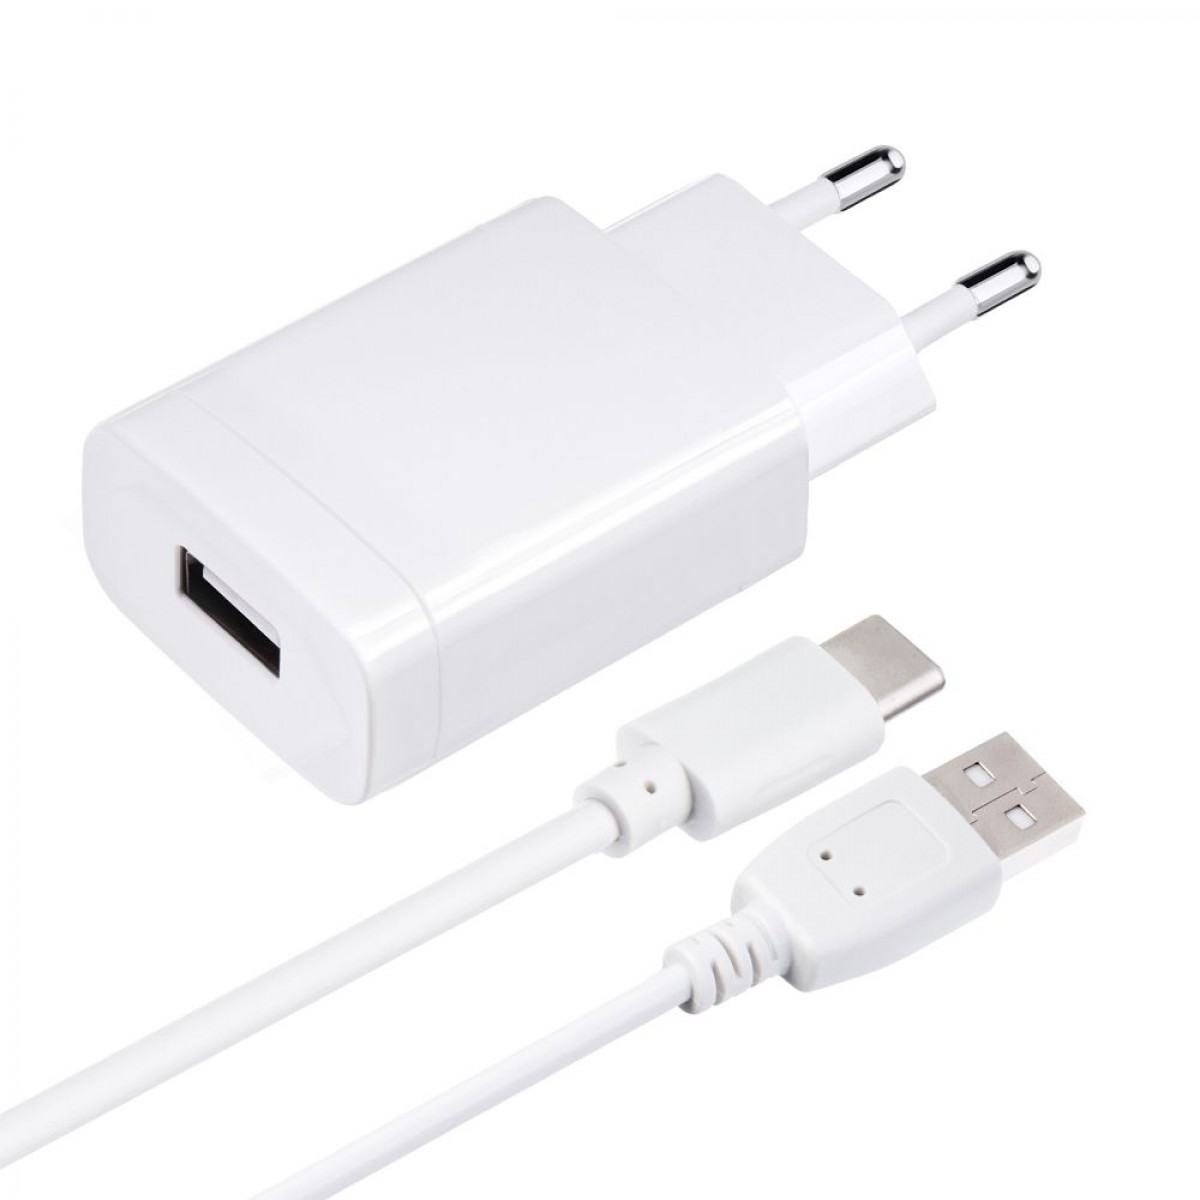 CHARGER FORCELL WITH USB TYPE C CABLE - 2.4A 18W WITH QUICK CHARGE 3.0 FUNCTION